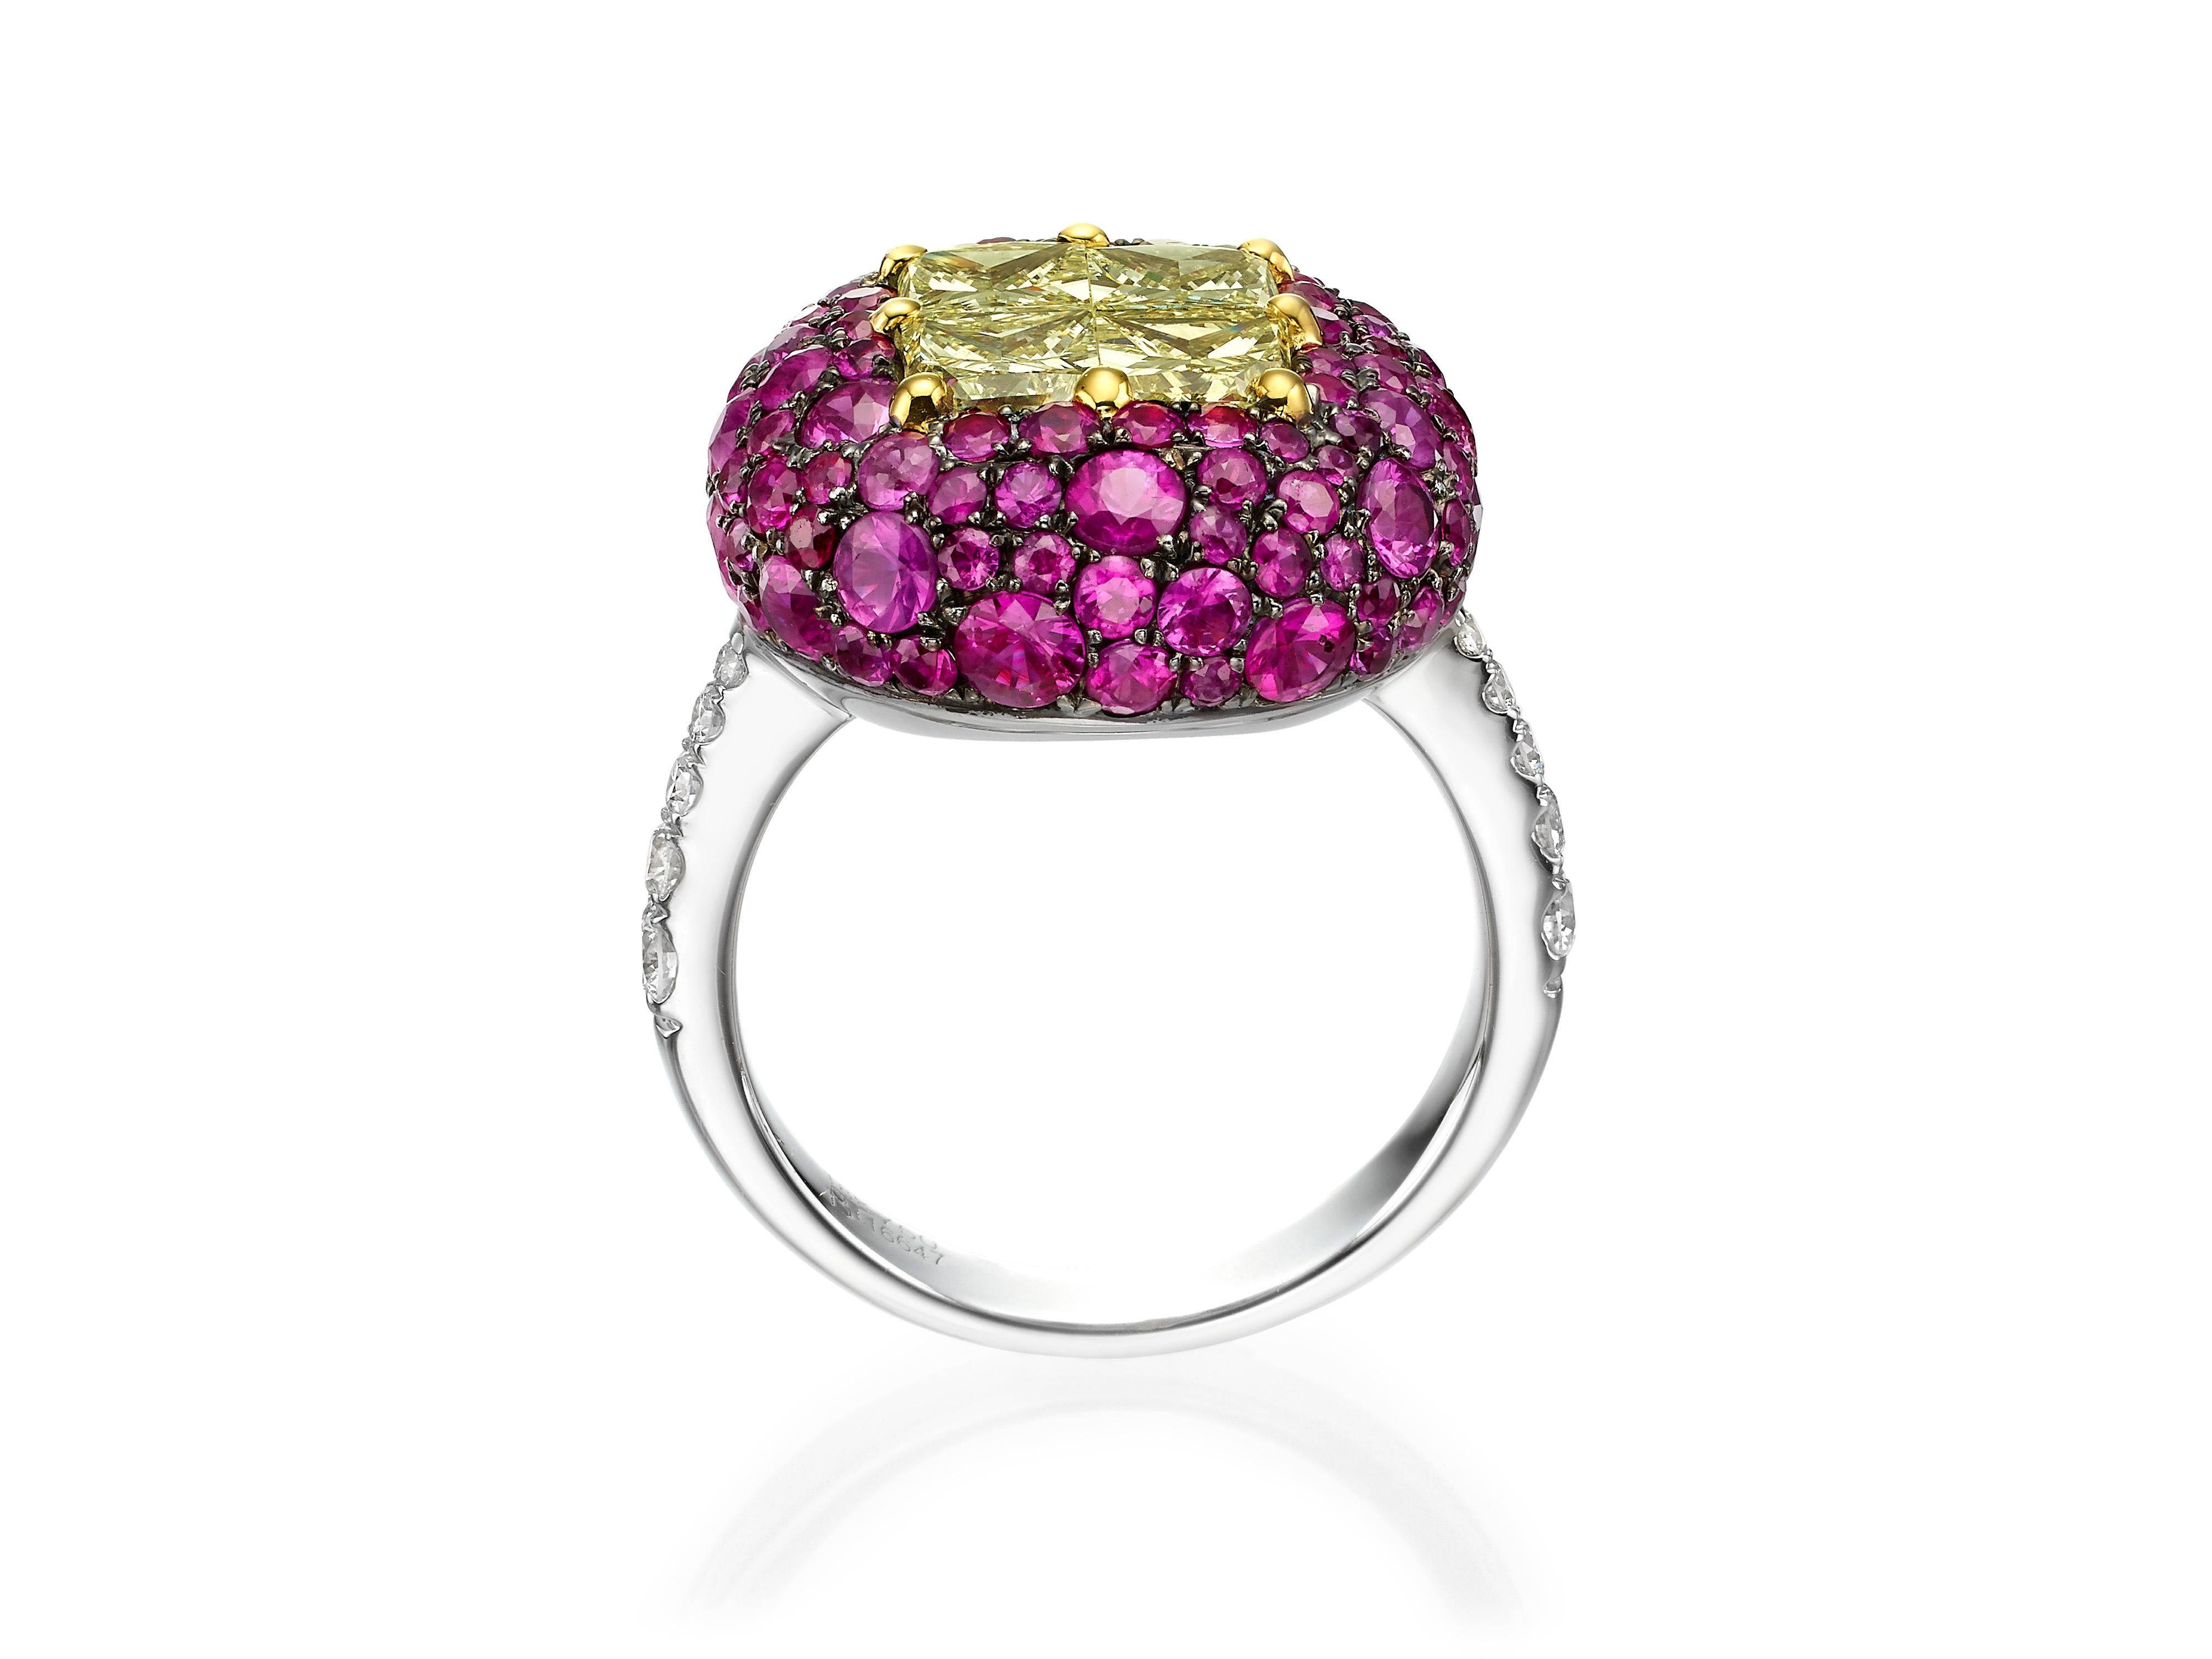 Handcrafted in 18K white gold, this stunning ring is centered with four yellow diamonds (totaling 1.84 carats) to create an illusion of one large single yellow diamond.  Surrounded by a cluster of 108 round red rubies (totaling 3.53 carats) and 0.29